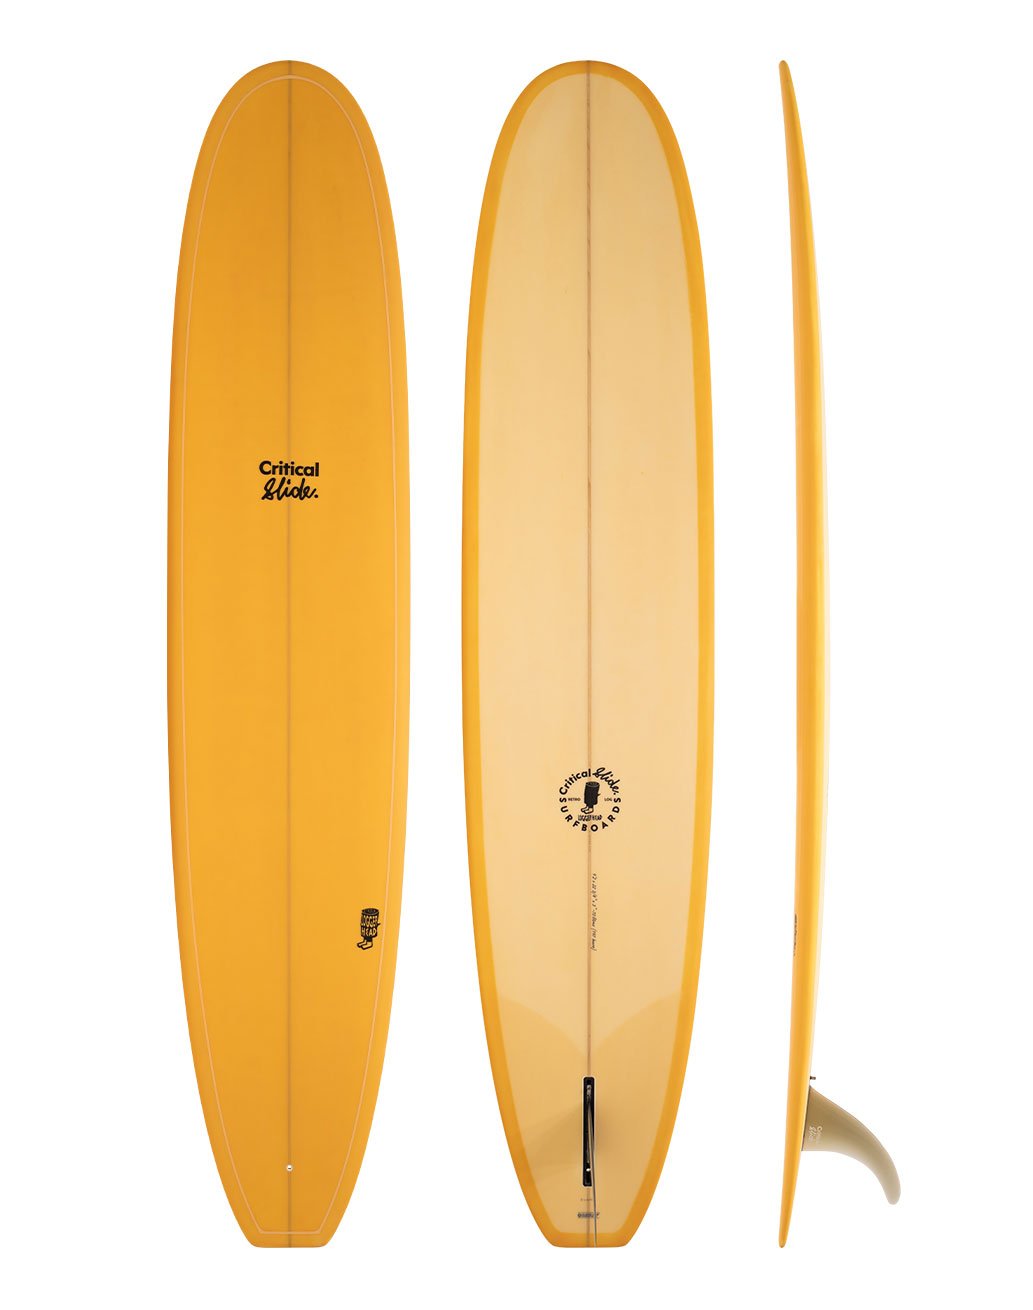 The Critical Slide Society Surfboards Logger Head - yellow longboard